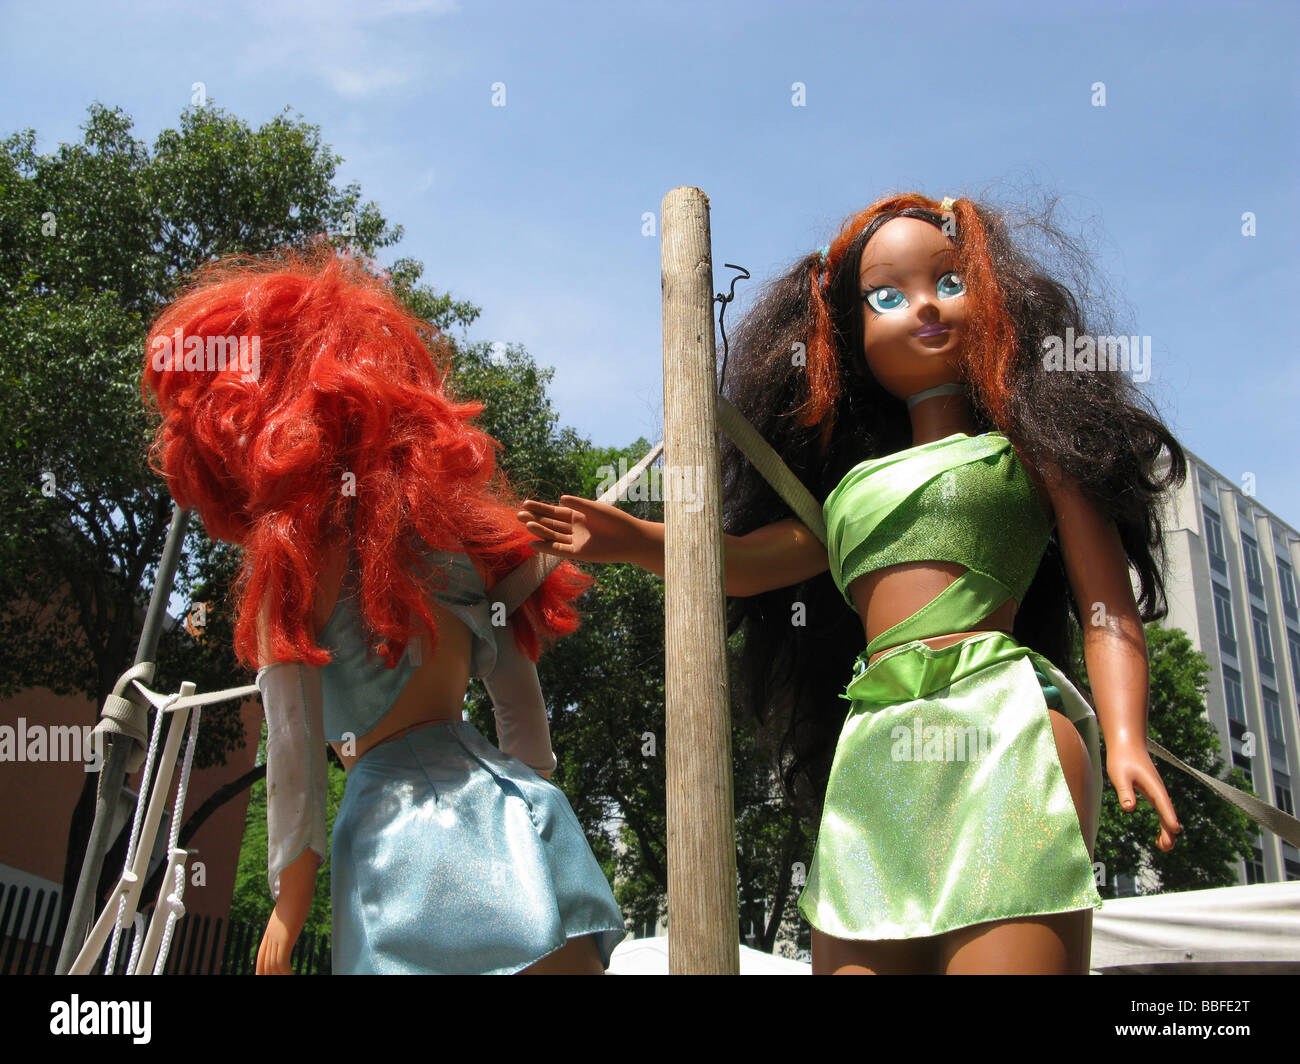 two girls dolls toys in city town street Stock Photo